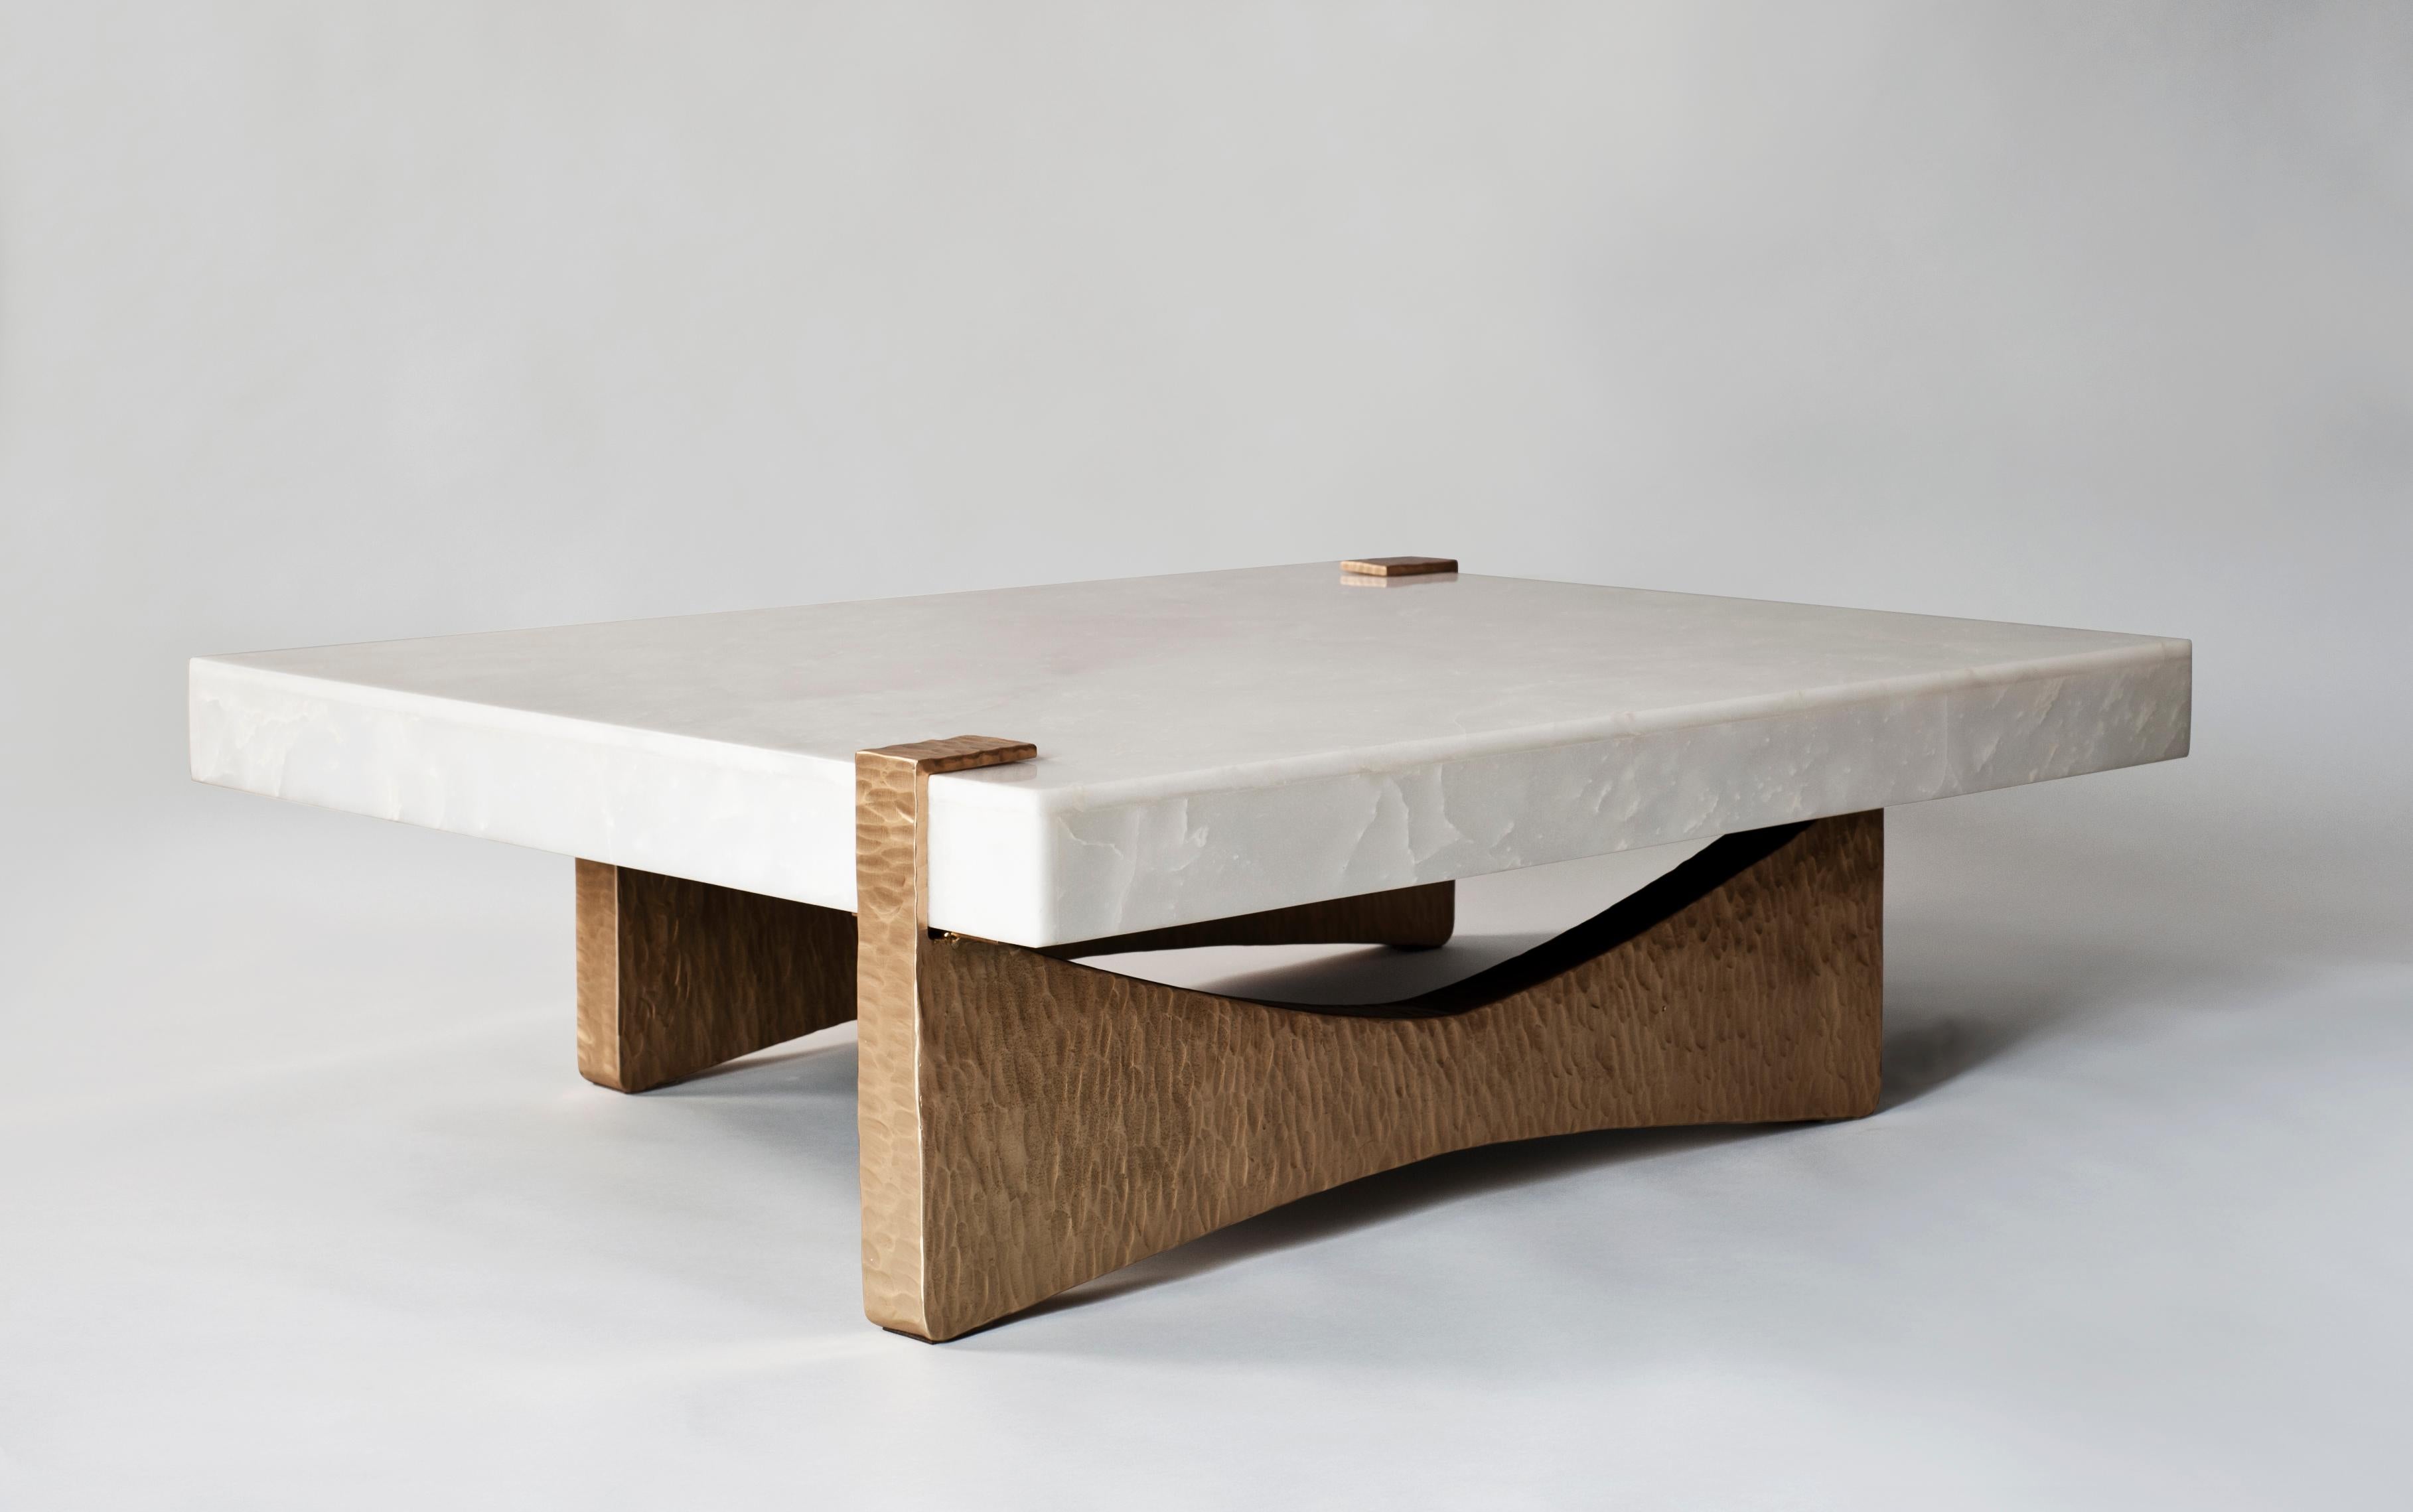 Moore coffee table by DeMuro Das 
Dimensions: W 167 x D 100 x H 37 cm
Materials: White onyx - Polished (Slap)

Dimensions and finishes can be customized.

DeMuro Das is an international design firm and the aesthetic and cultural coalescence of